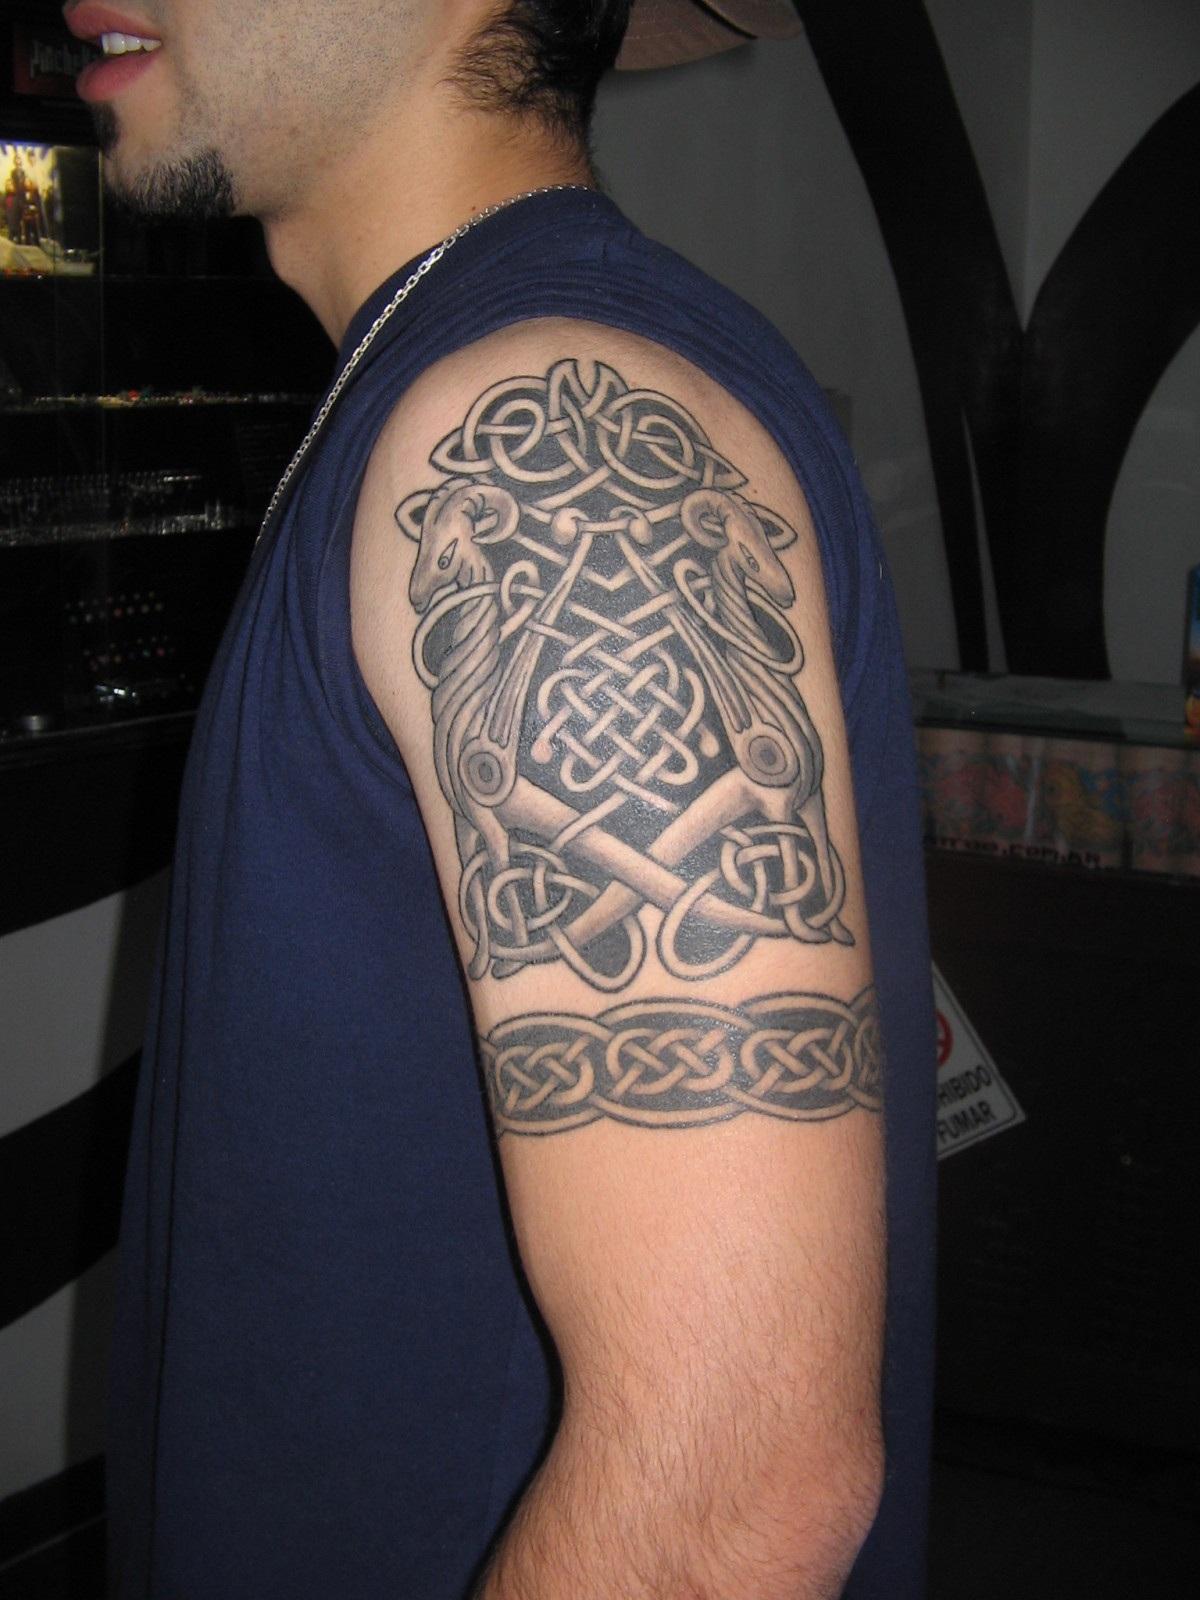 Arm Tattoos for Men| Arm Tattoo Designs Pictures Ideas - Arm Tattoo For Men 3